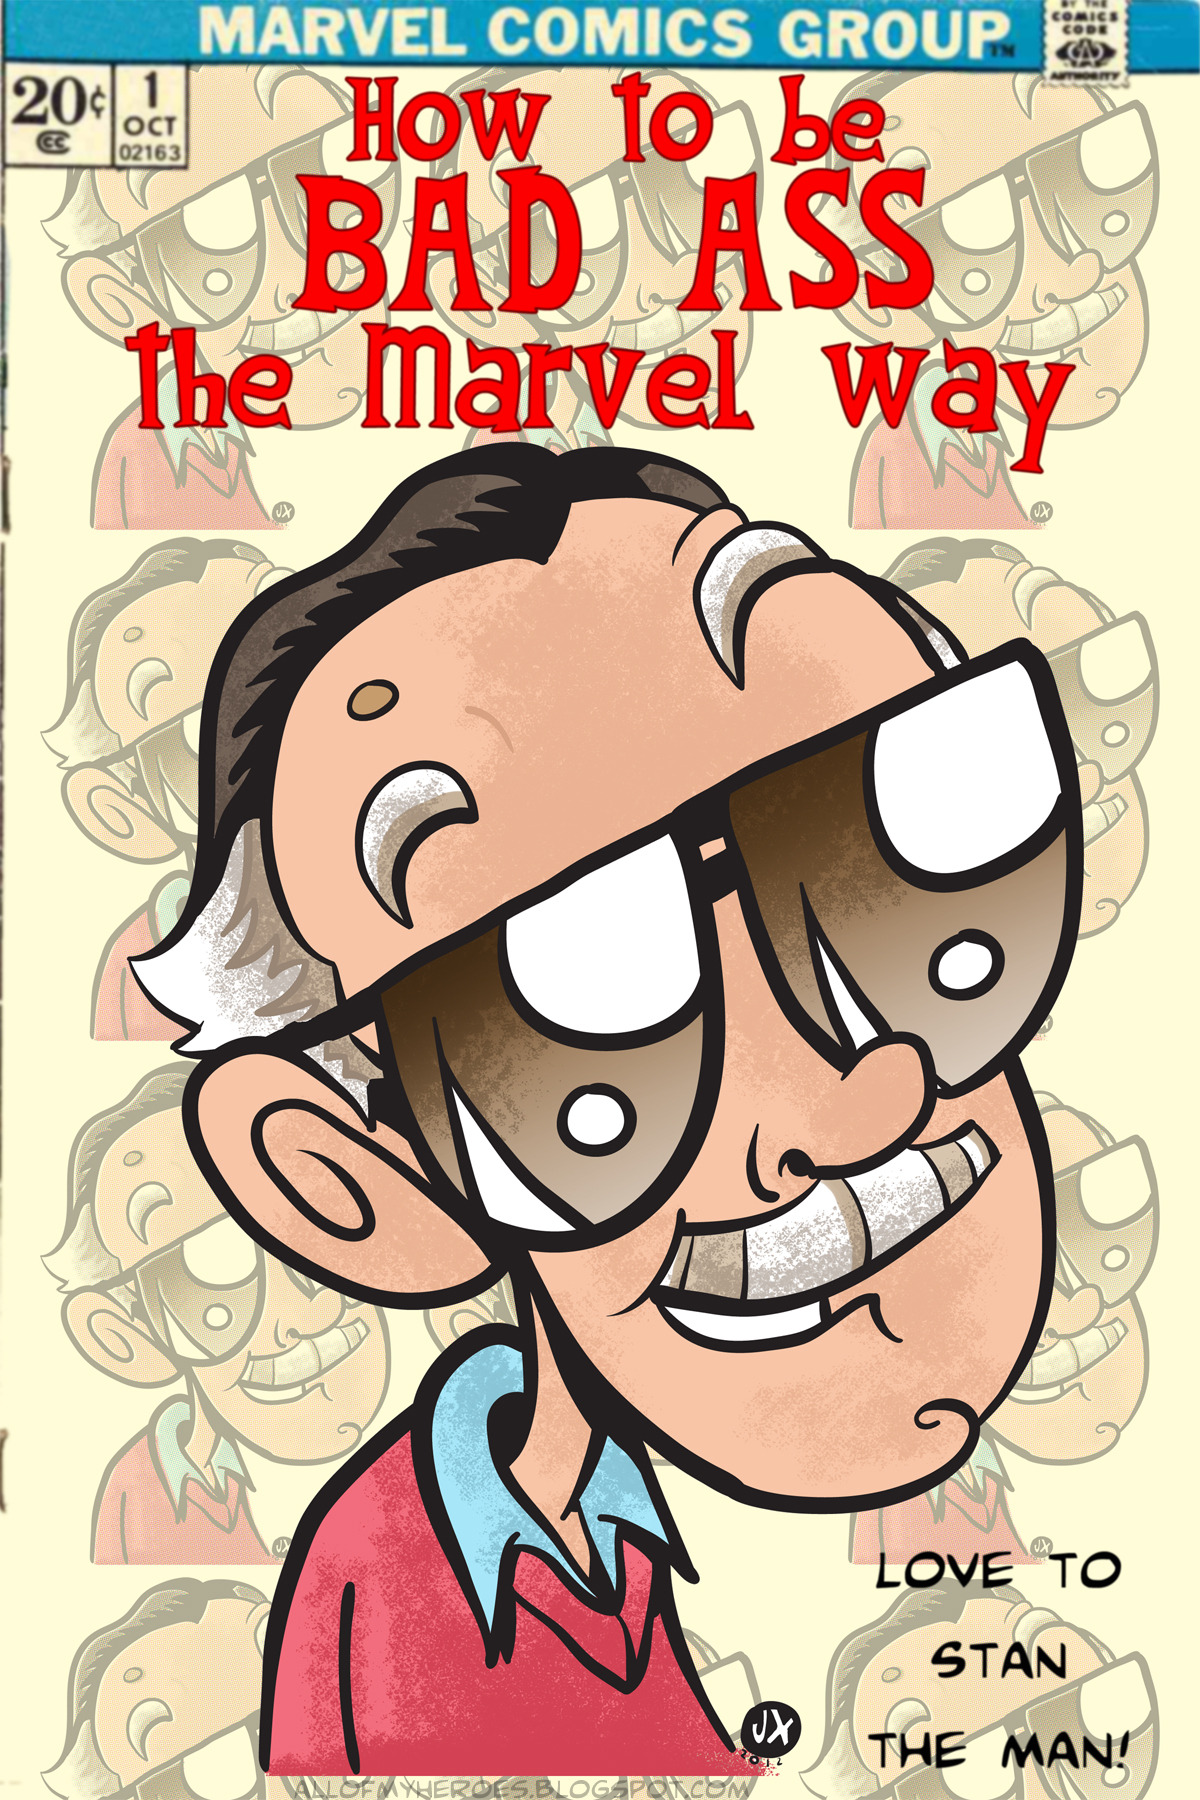 tumblrtoons: Watched a great doc on the great Stan Lee yesterday and sketched him as a warm-up before cutting into freelance. I liked it so much I inked it up and colored it. You’re the best Stan! Thanks for all the comics, heroes, and all you’ve had a hand in creating. Excelsior! -Jeaux Janovsky 